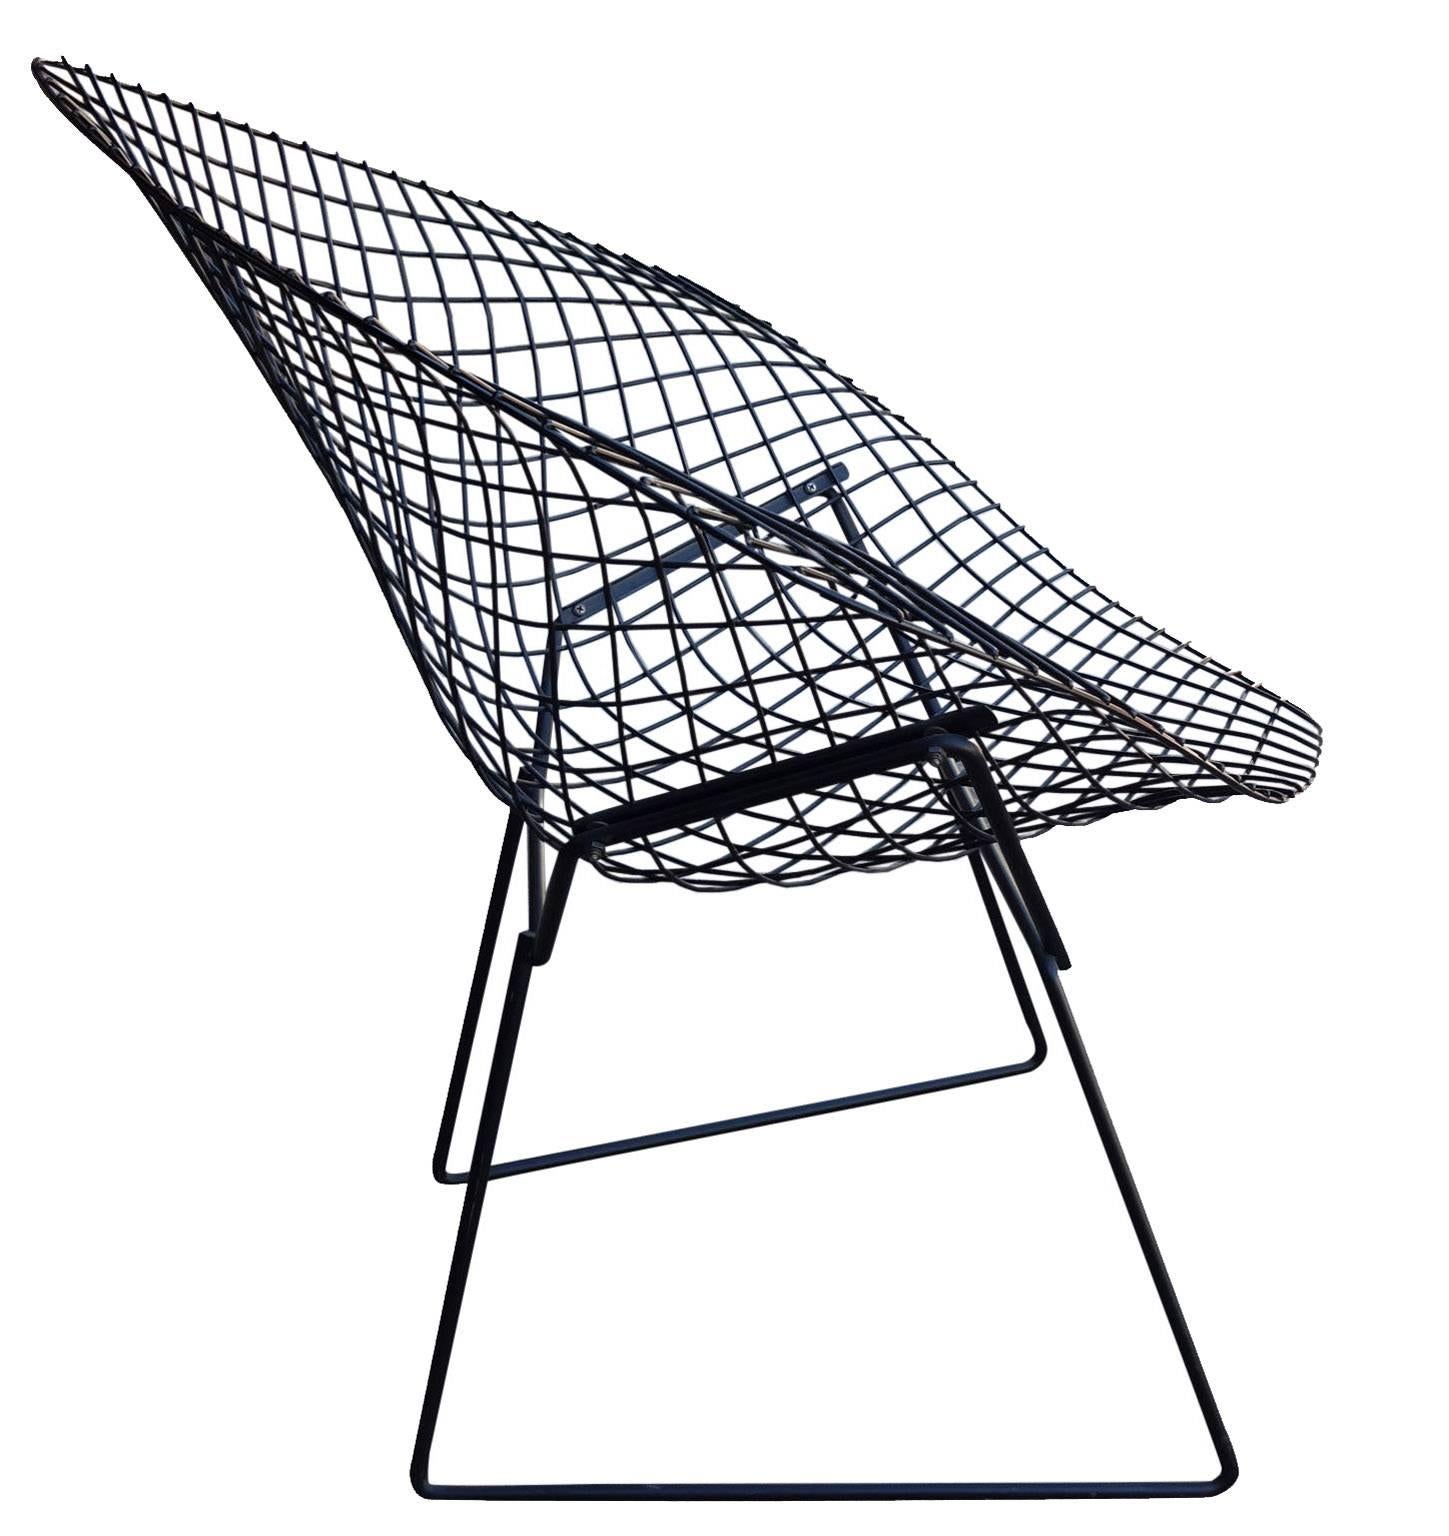 Knoll started production of Harry Bertoia's Diamond chair in the early 1950s. Since then it has become one of the most iconic designs of Mid-Century Modernism. The welded black steel frame is in excellent condition. This chair has been upgraded with